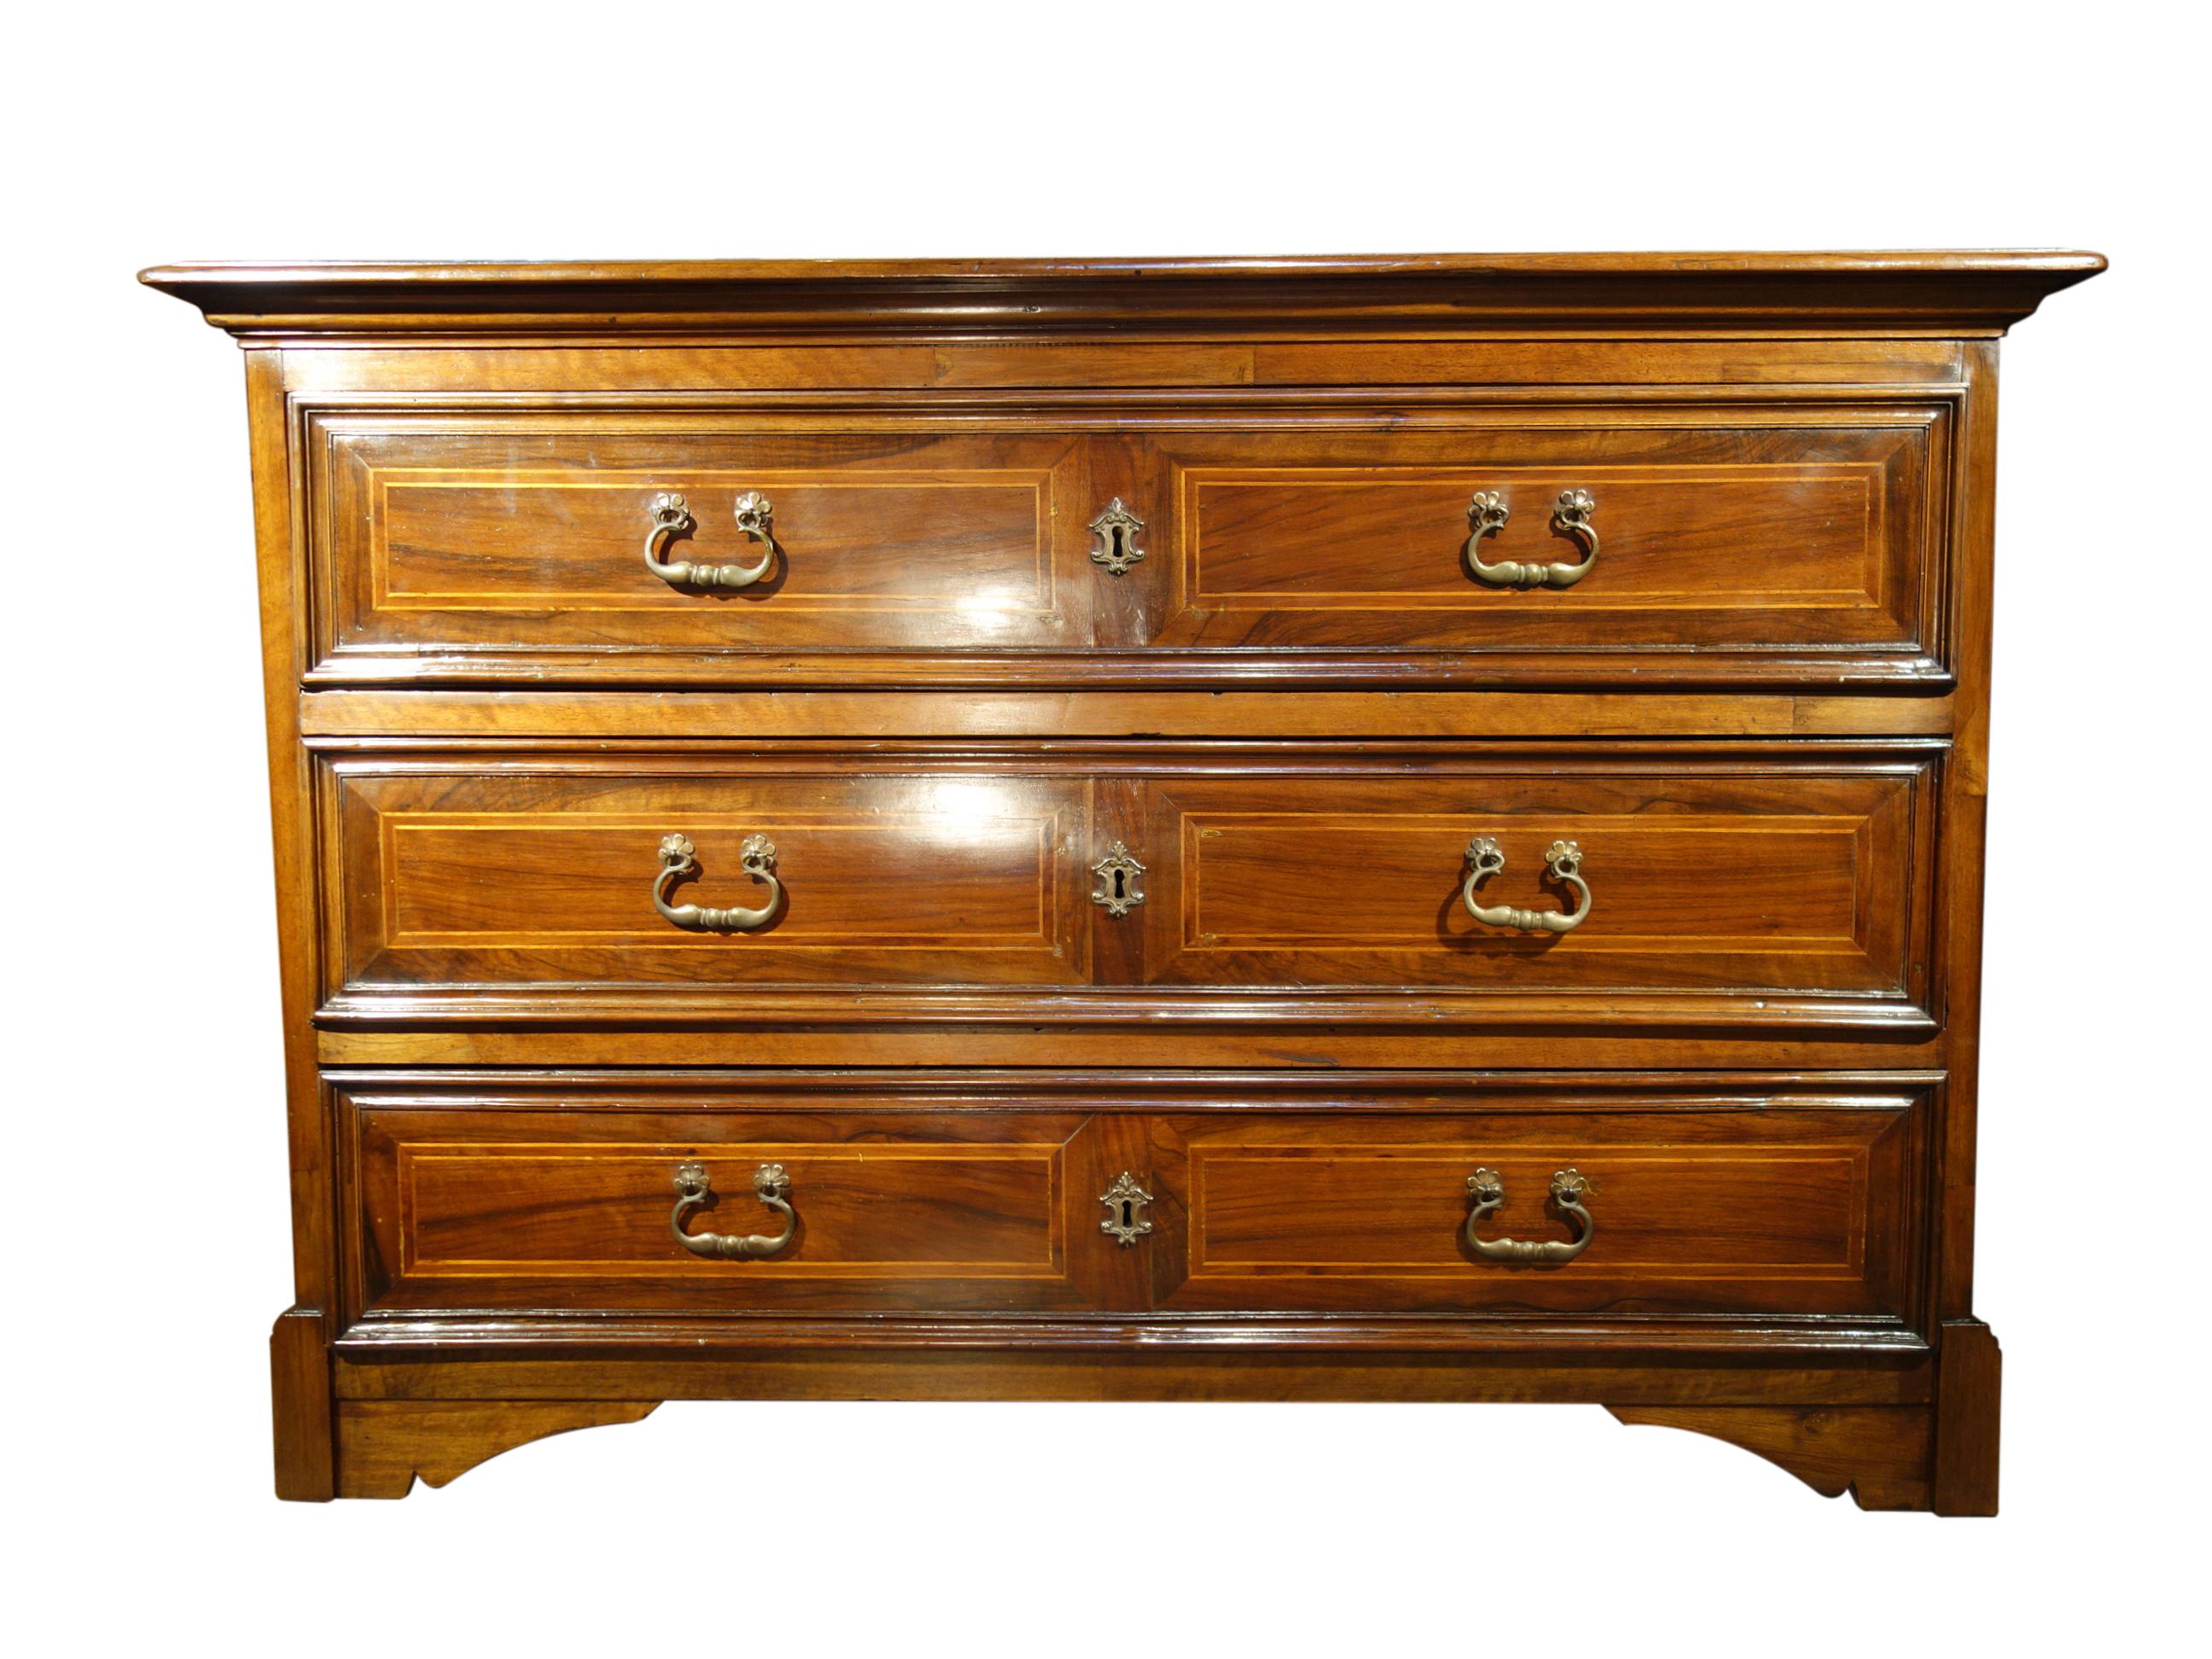 Early 18th Century Italian Louis XIV Walnut Dresser with Fruitwood Inlay & Brass For Sale 2